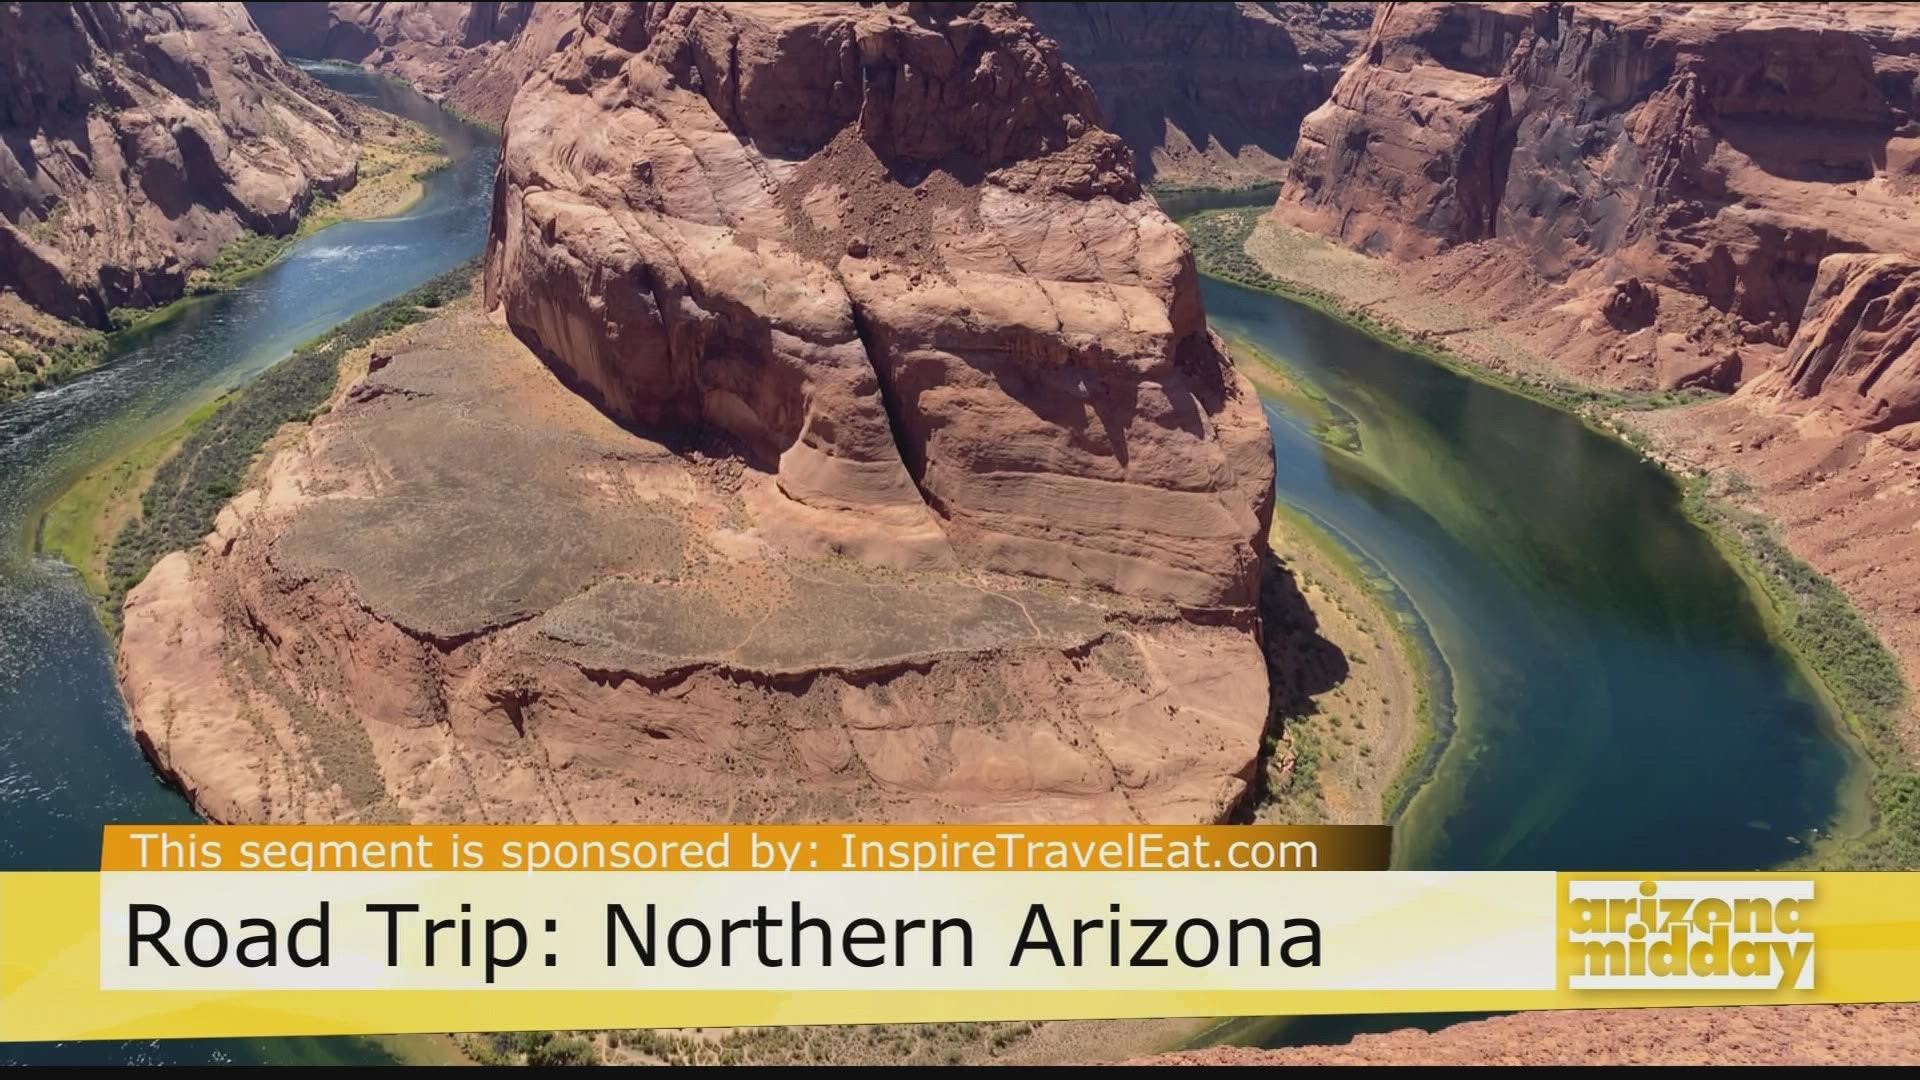 Fraser LaVeay, with InspireTravelEat.com, shares his top Northern Arizona locations including Top Hikes & Eats in Page